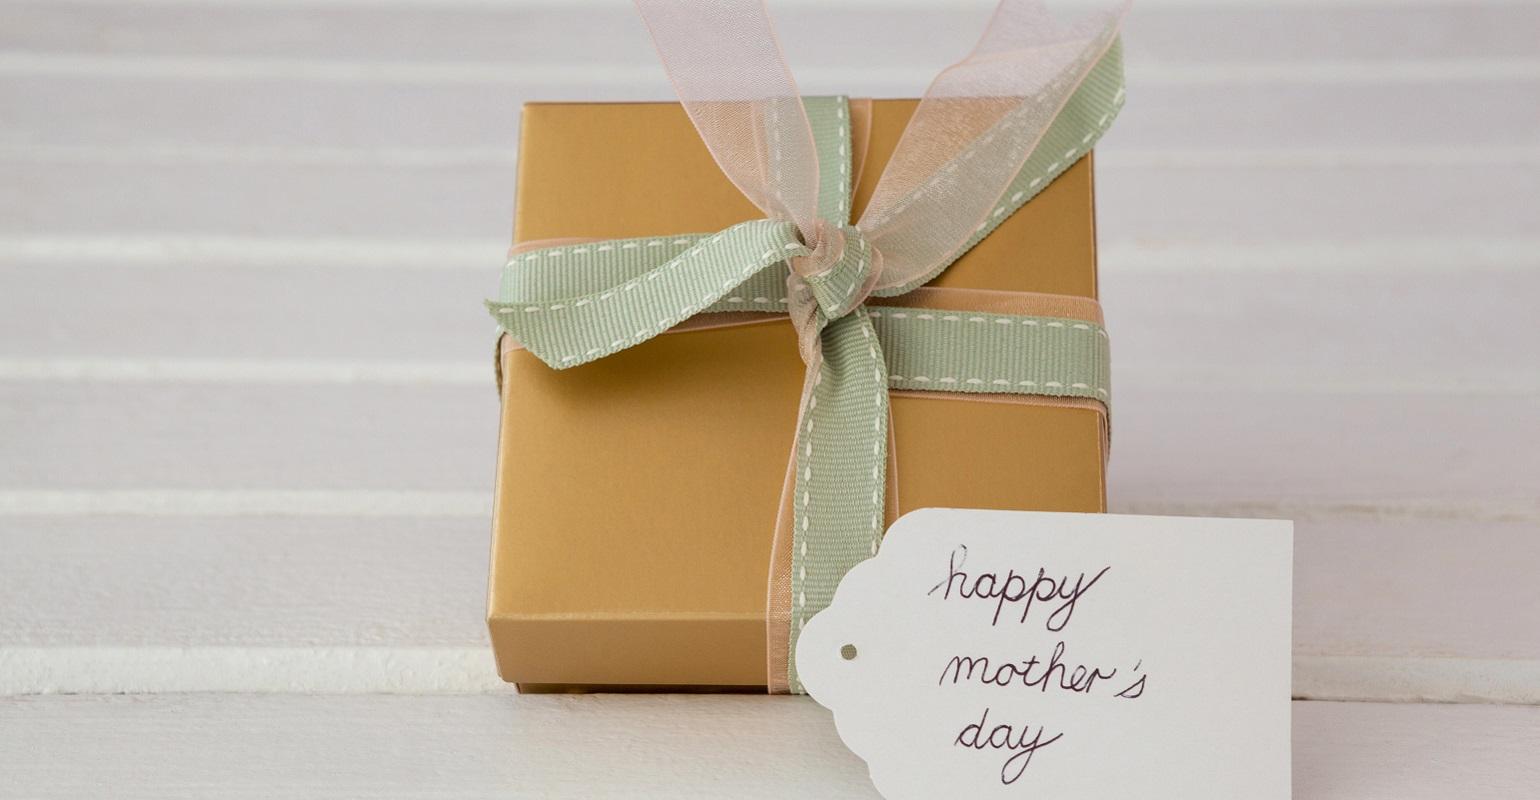 https://www.itprotoday.com/sites/itprotoday.com/files/styles/article_featured_retina/public/mothers-day.jpg?itok=LywWND_Q